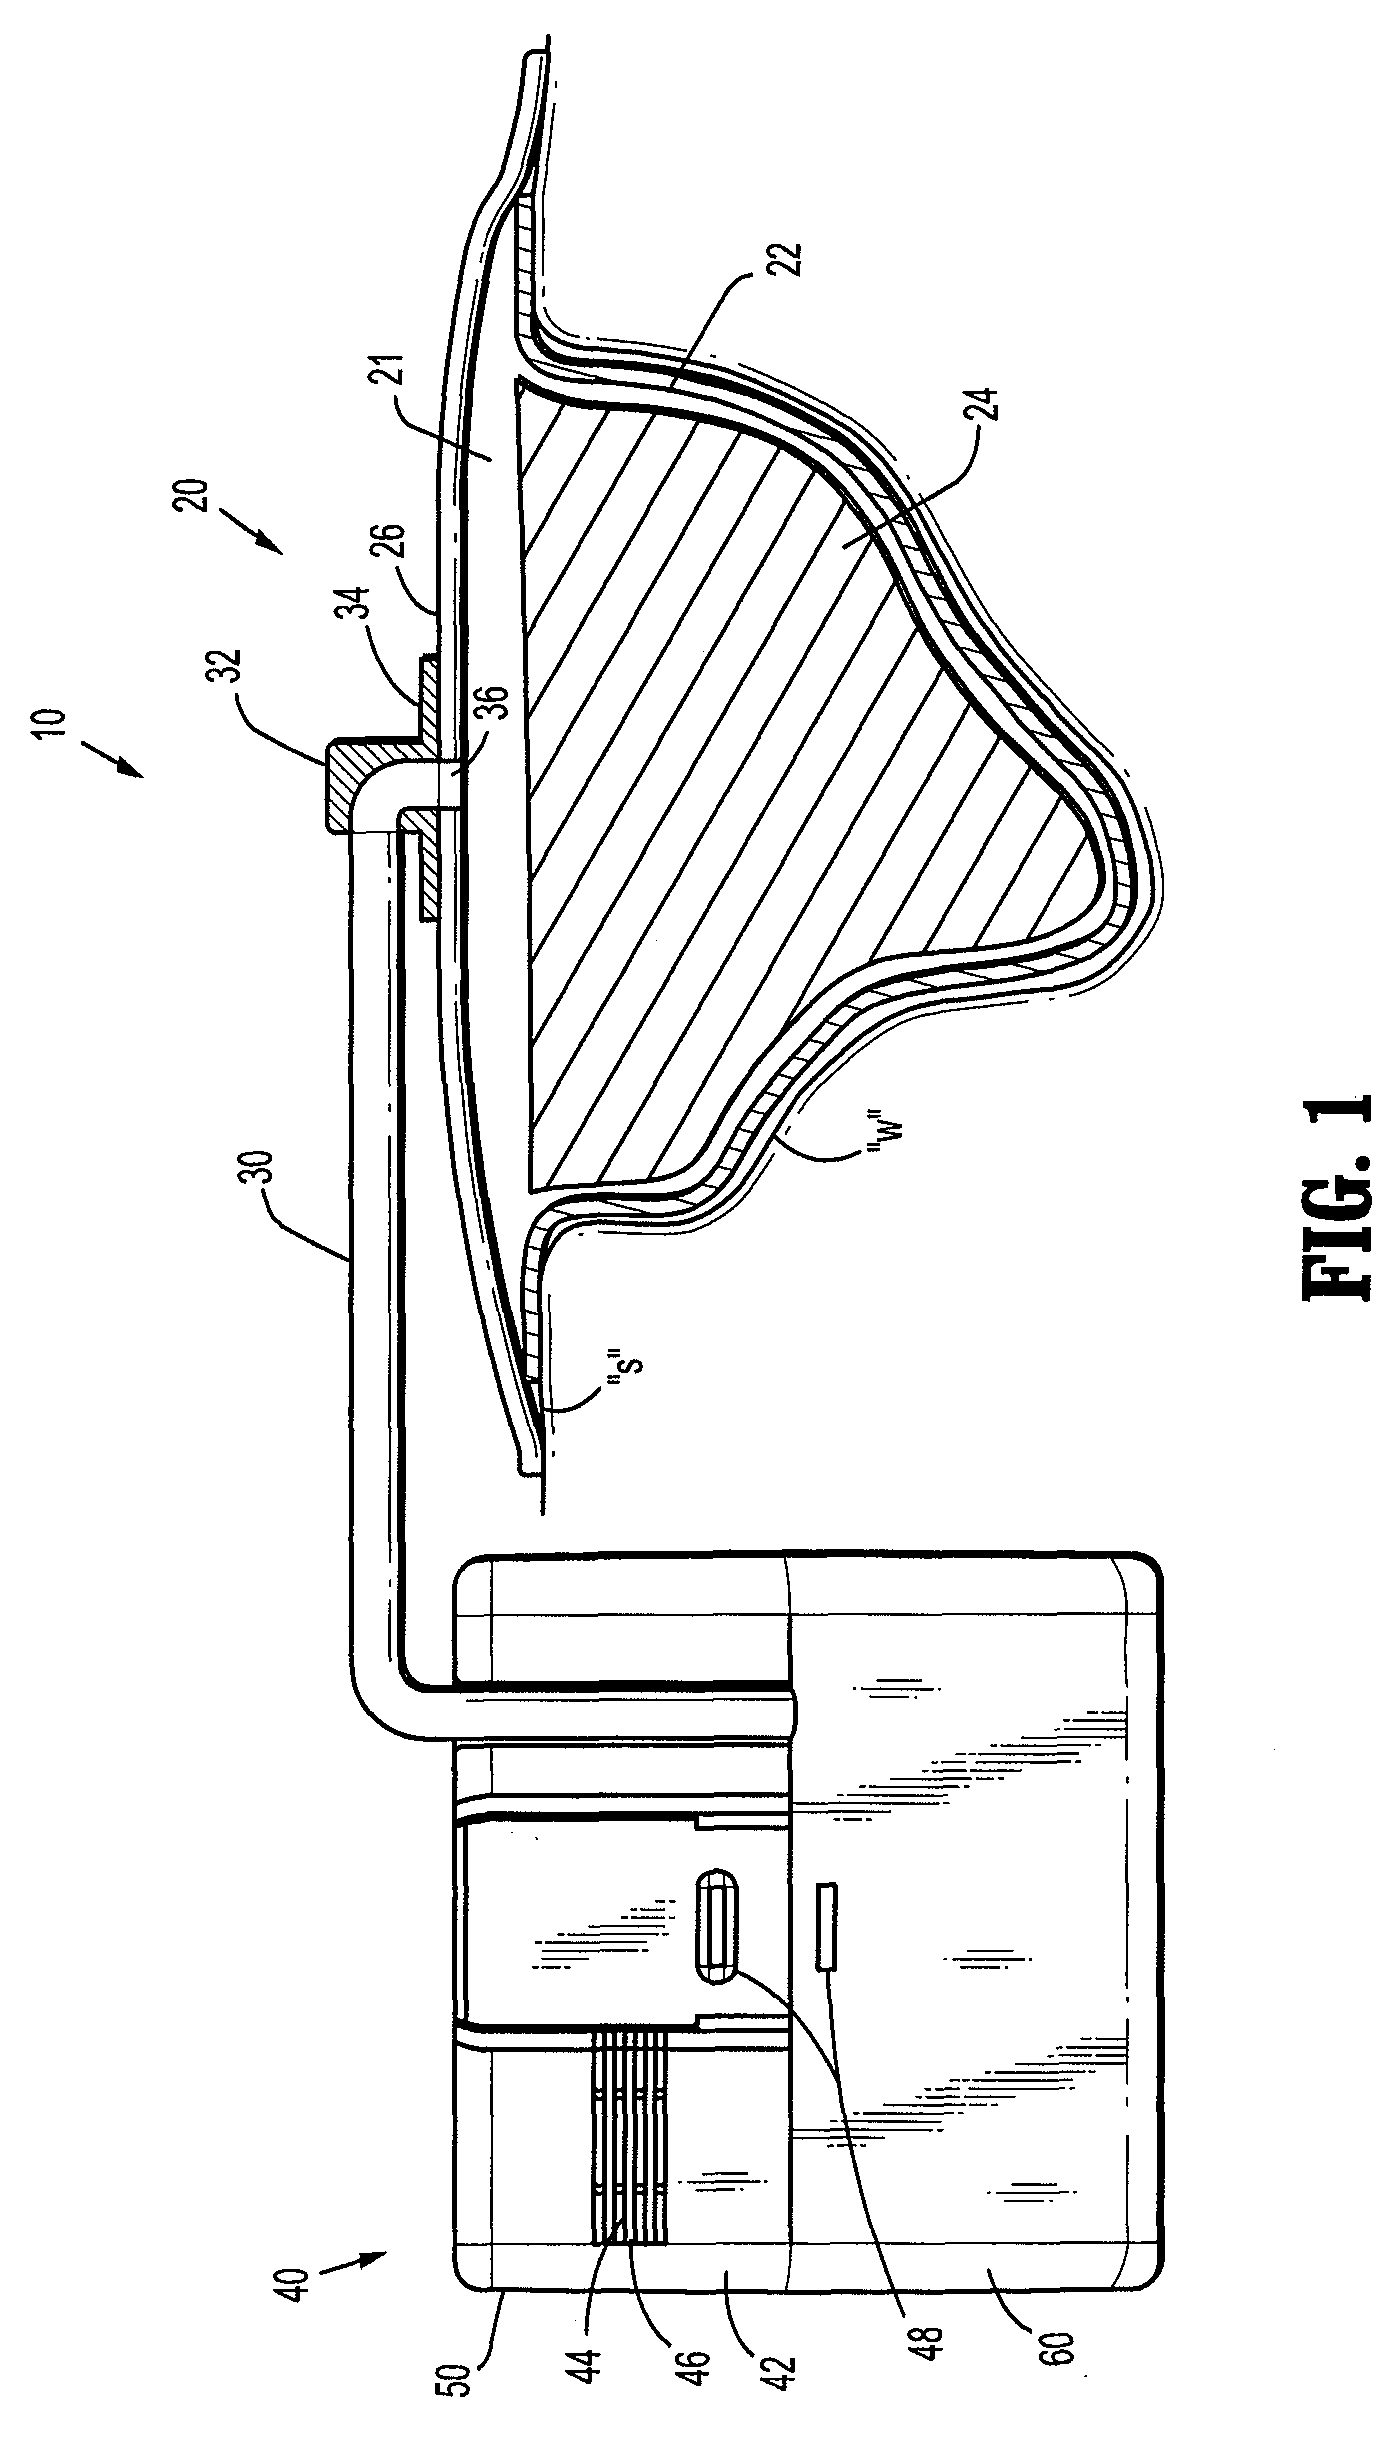 Canister for receiving wound exudate in a negative pressure therapy system